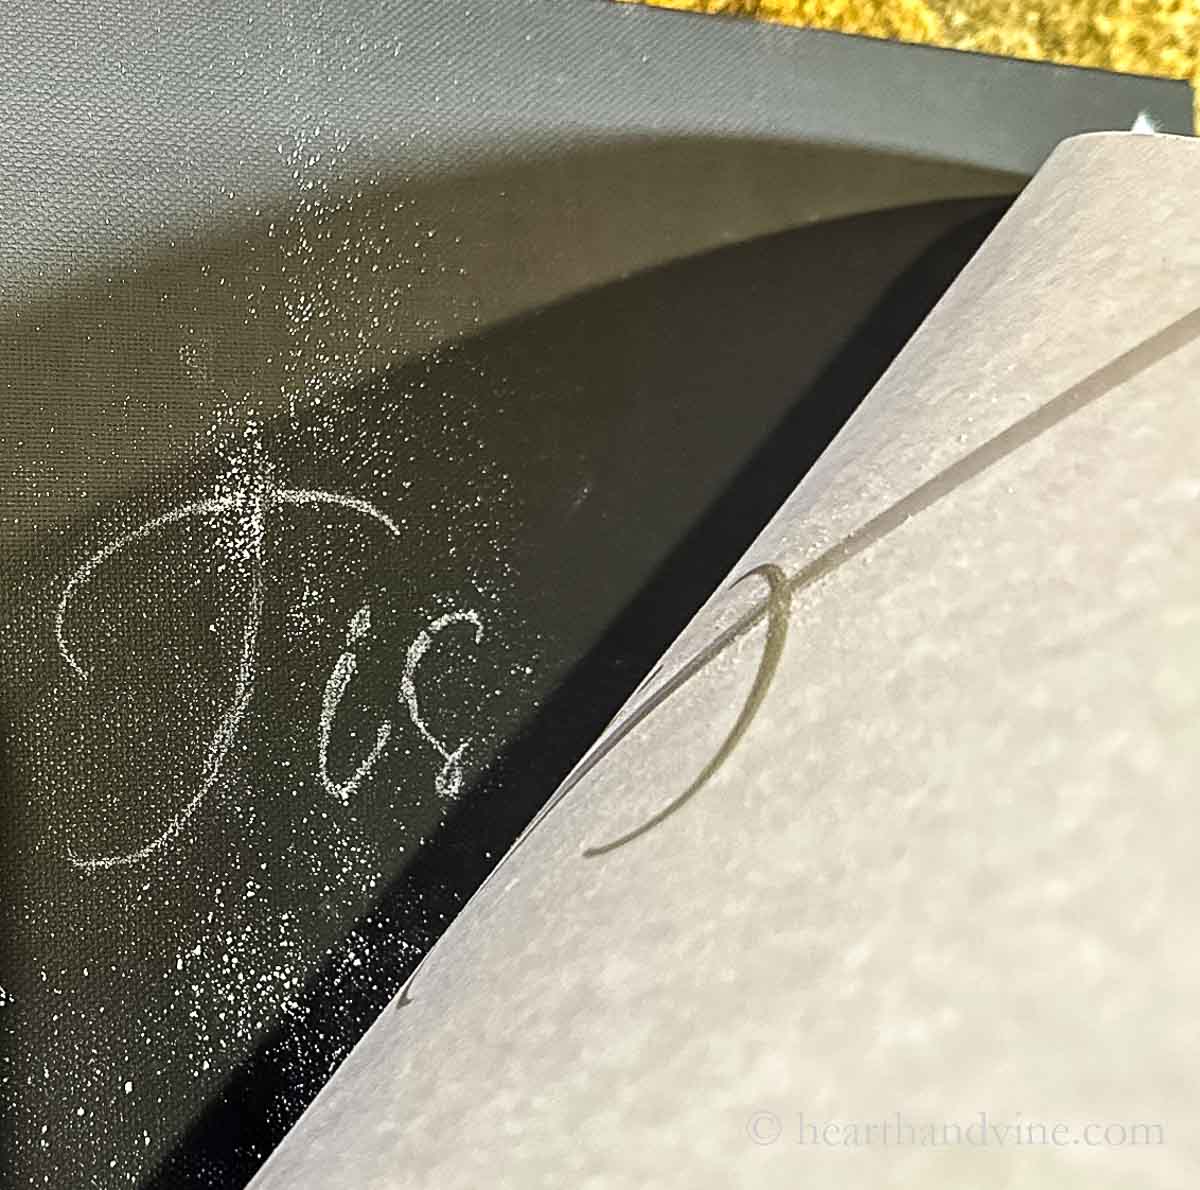 Paper lifted up to show the chalk transfer underneath showing the word "Tis."